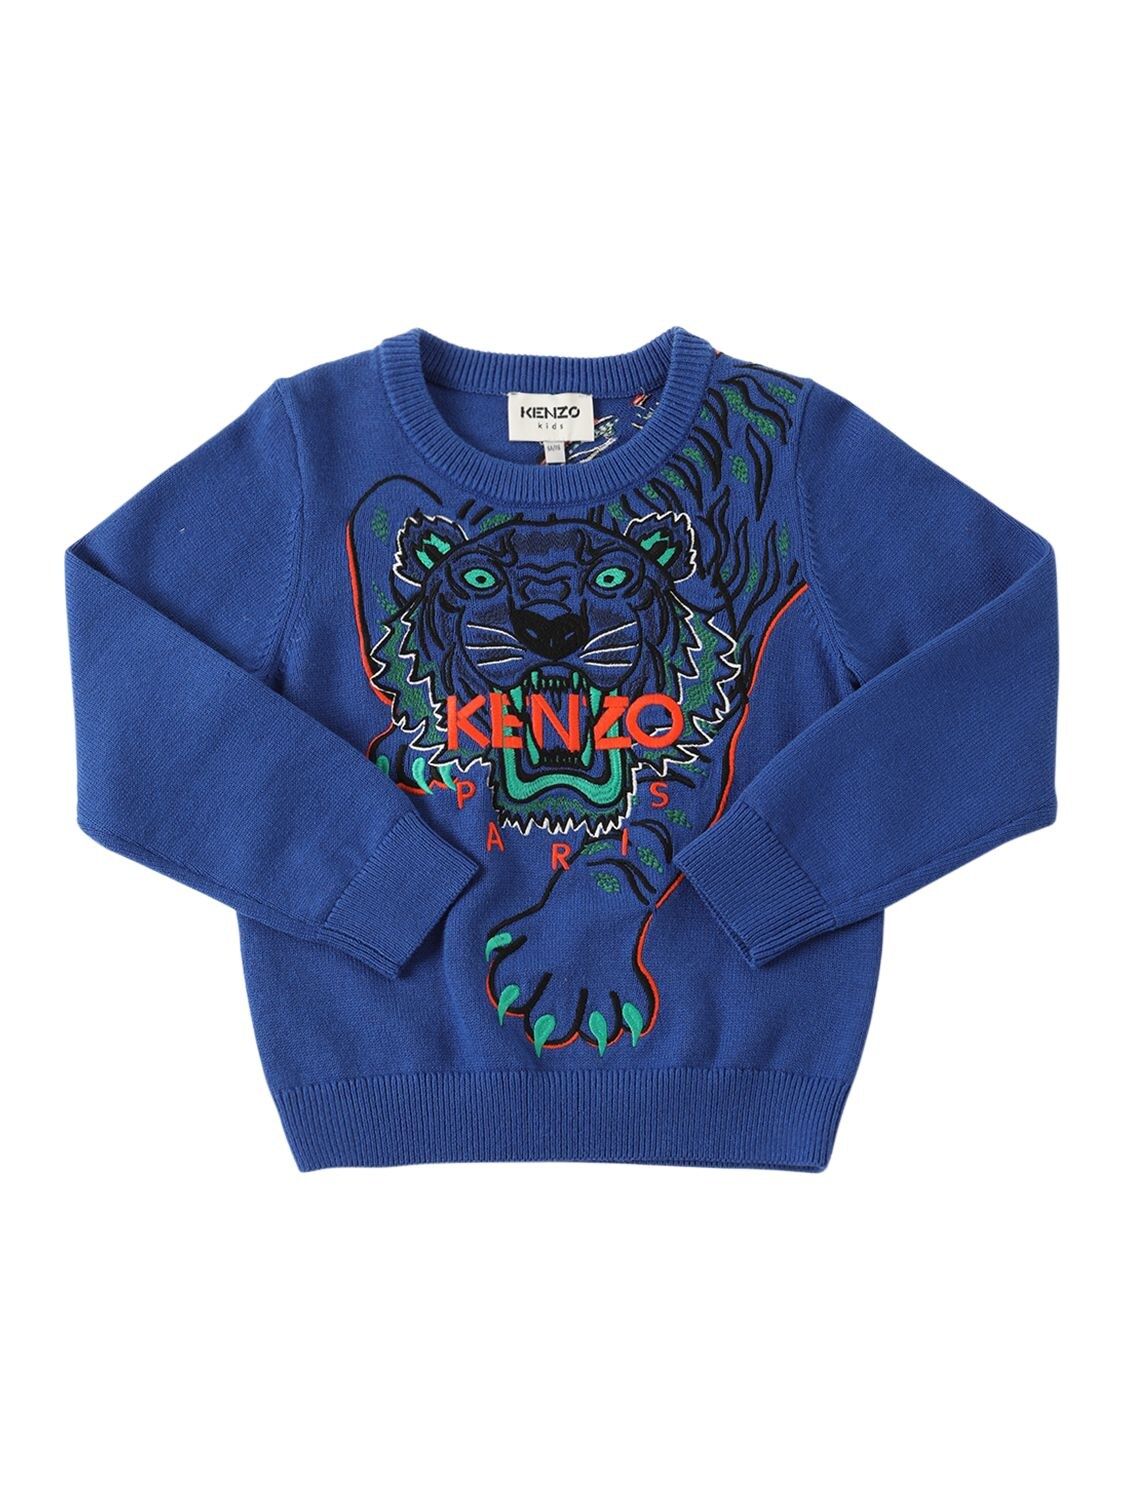 KENZO EMBROIDERED COTTON & CASHMERE jumper